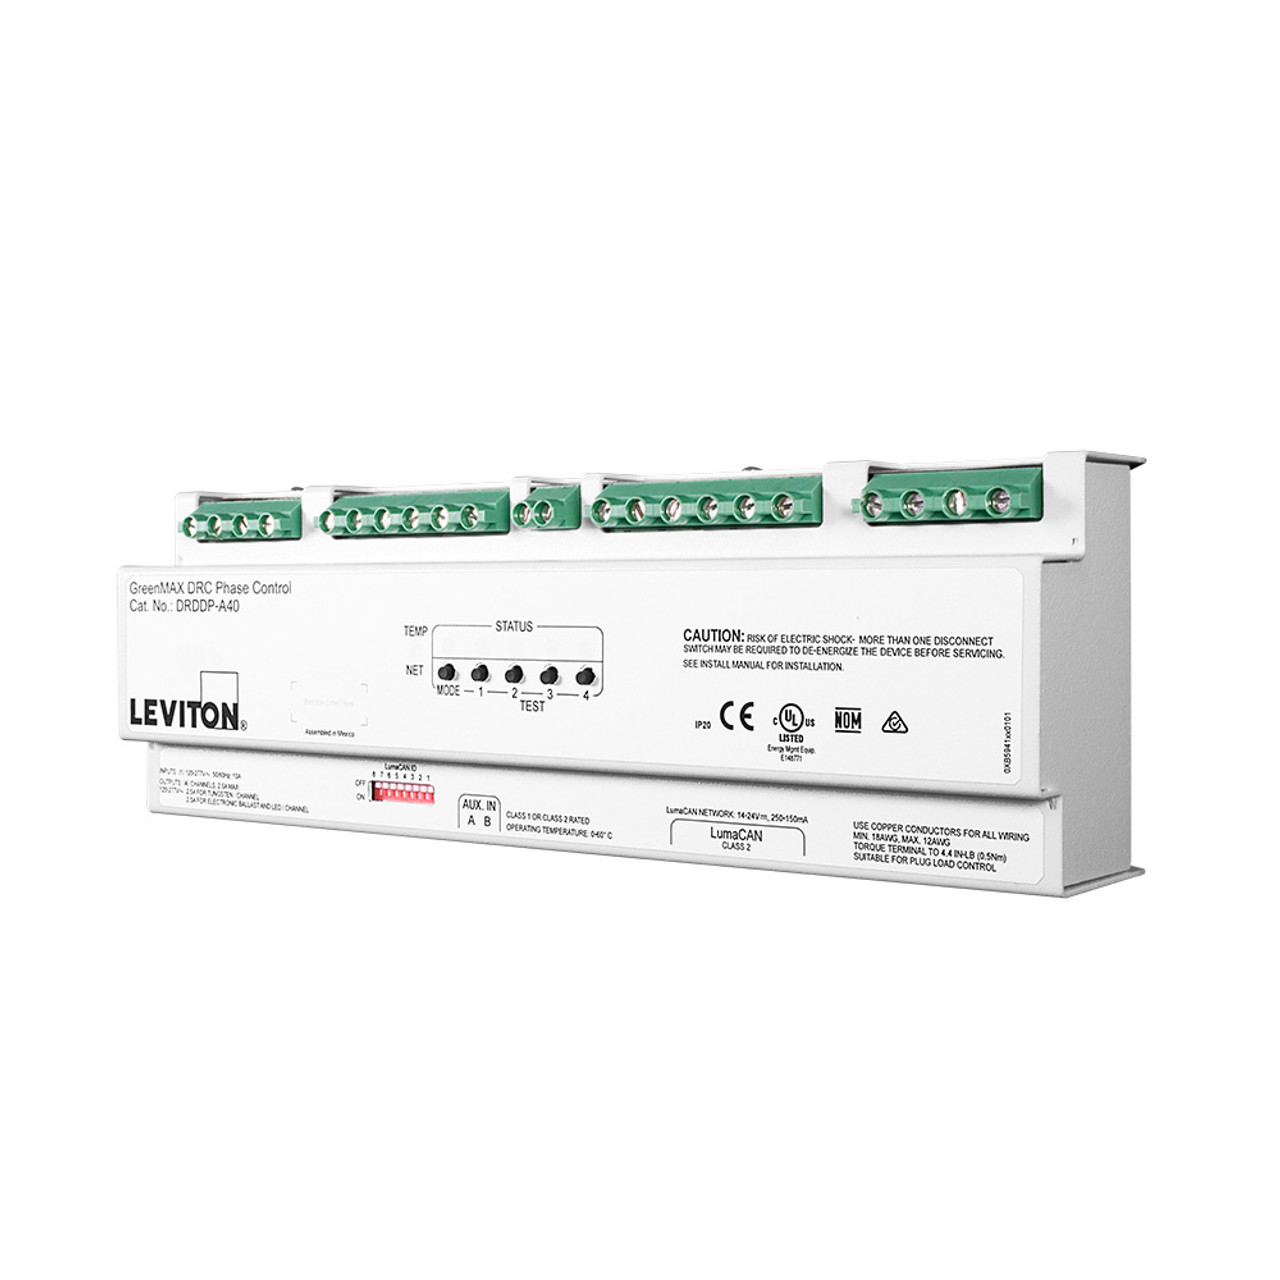 Leviton DRDDP-A40 GreenMAX DRC, Dimmer, 4 Channel, LED Controller, 2.5 Amps per Channel, 120-277VAC